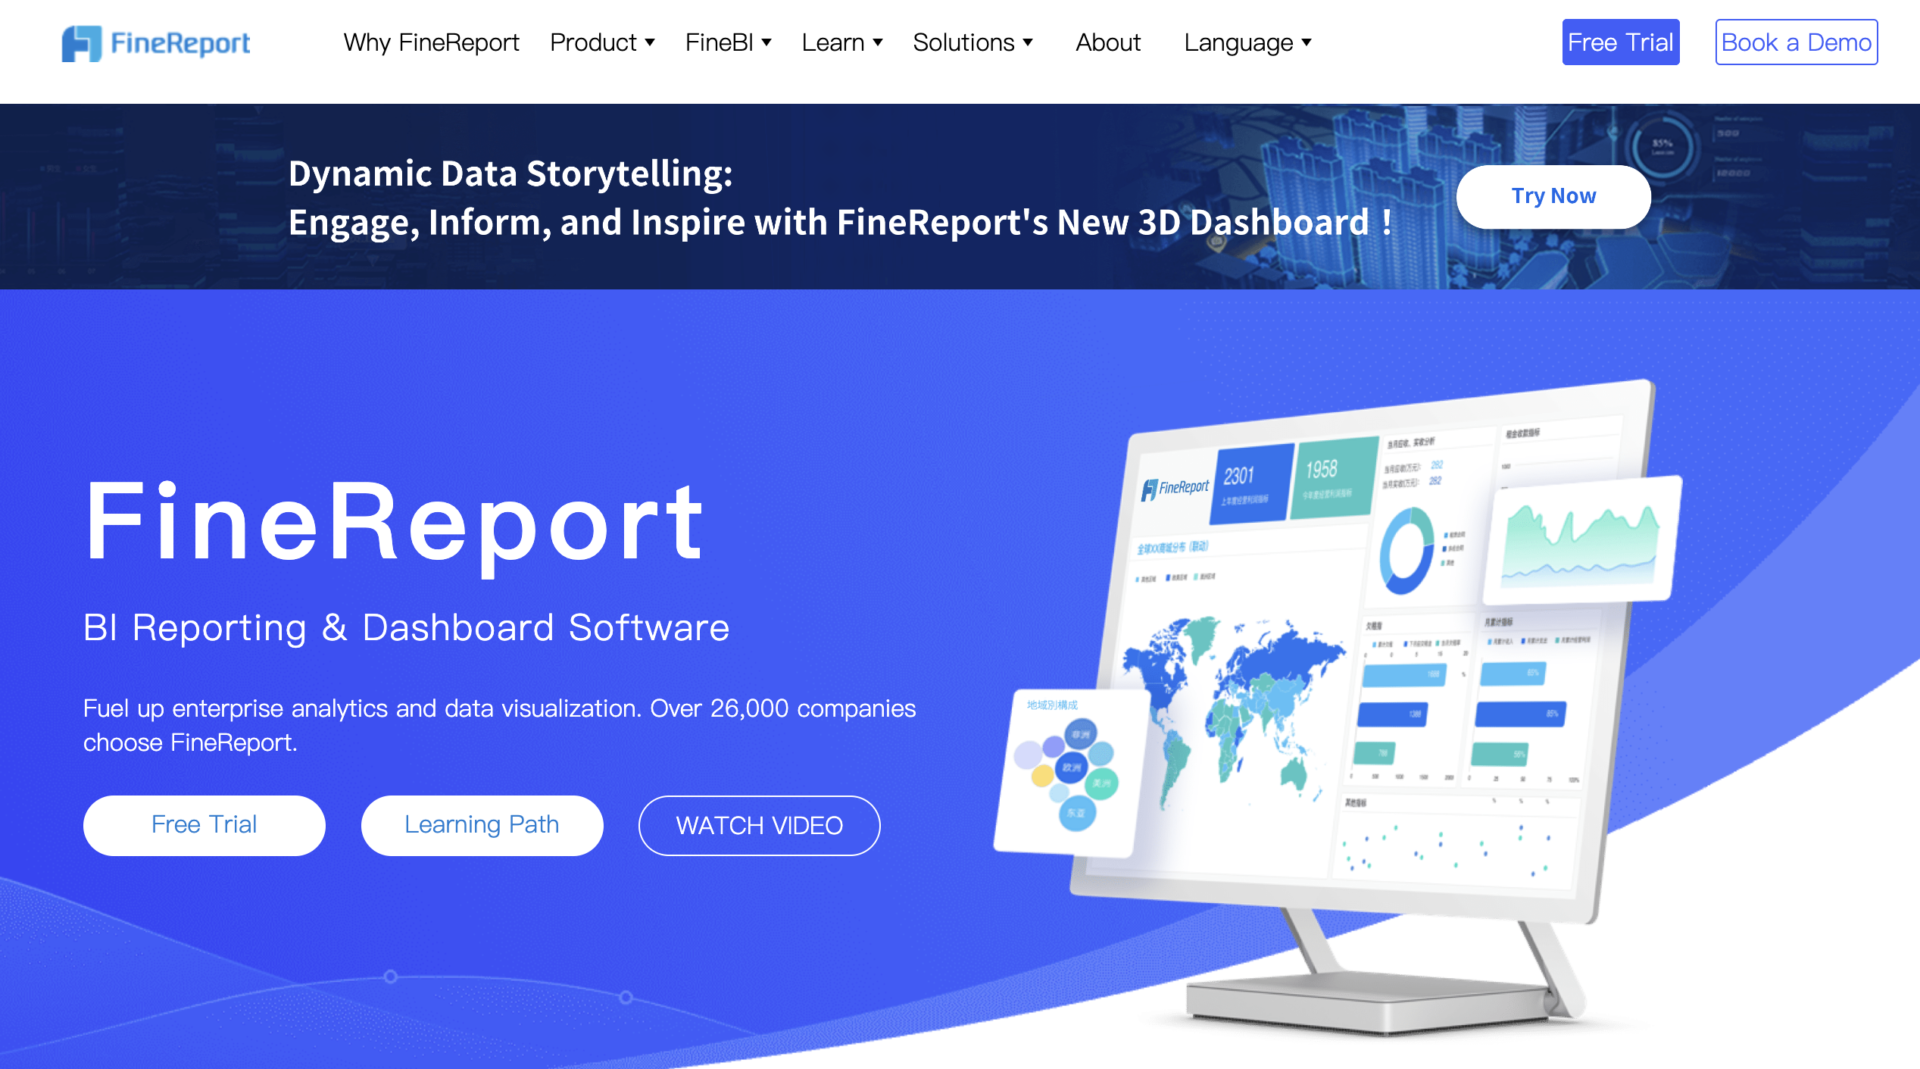 Top page of FineReport